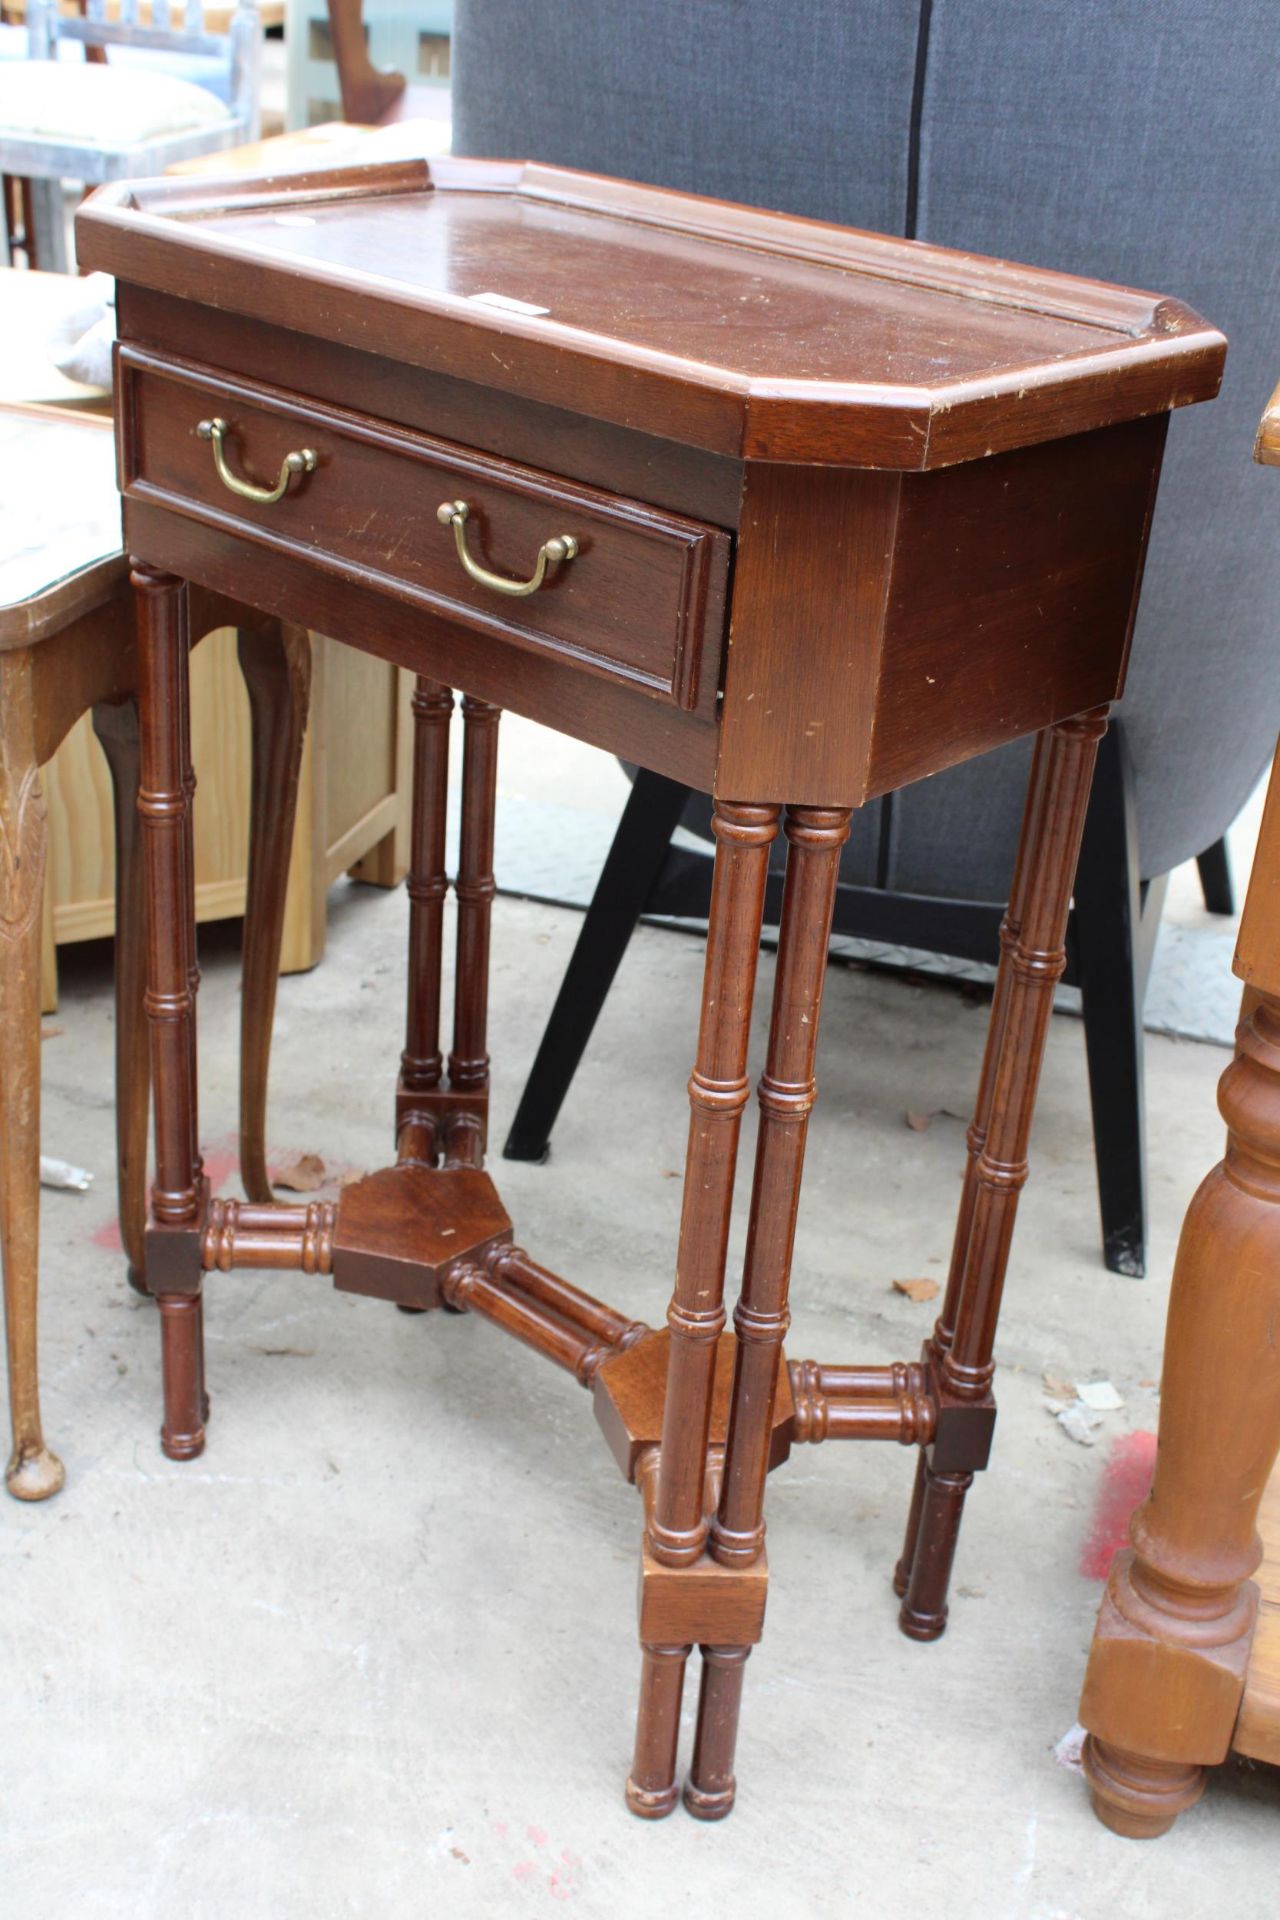 A MAHOGANY SIDE TABLE WITH CANTED CORNERS, SINGLE DRAWER AND MULTIPLE TURNED LEGS AND STRETCHERS - Image 2 of 2